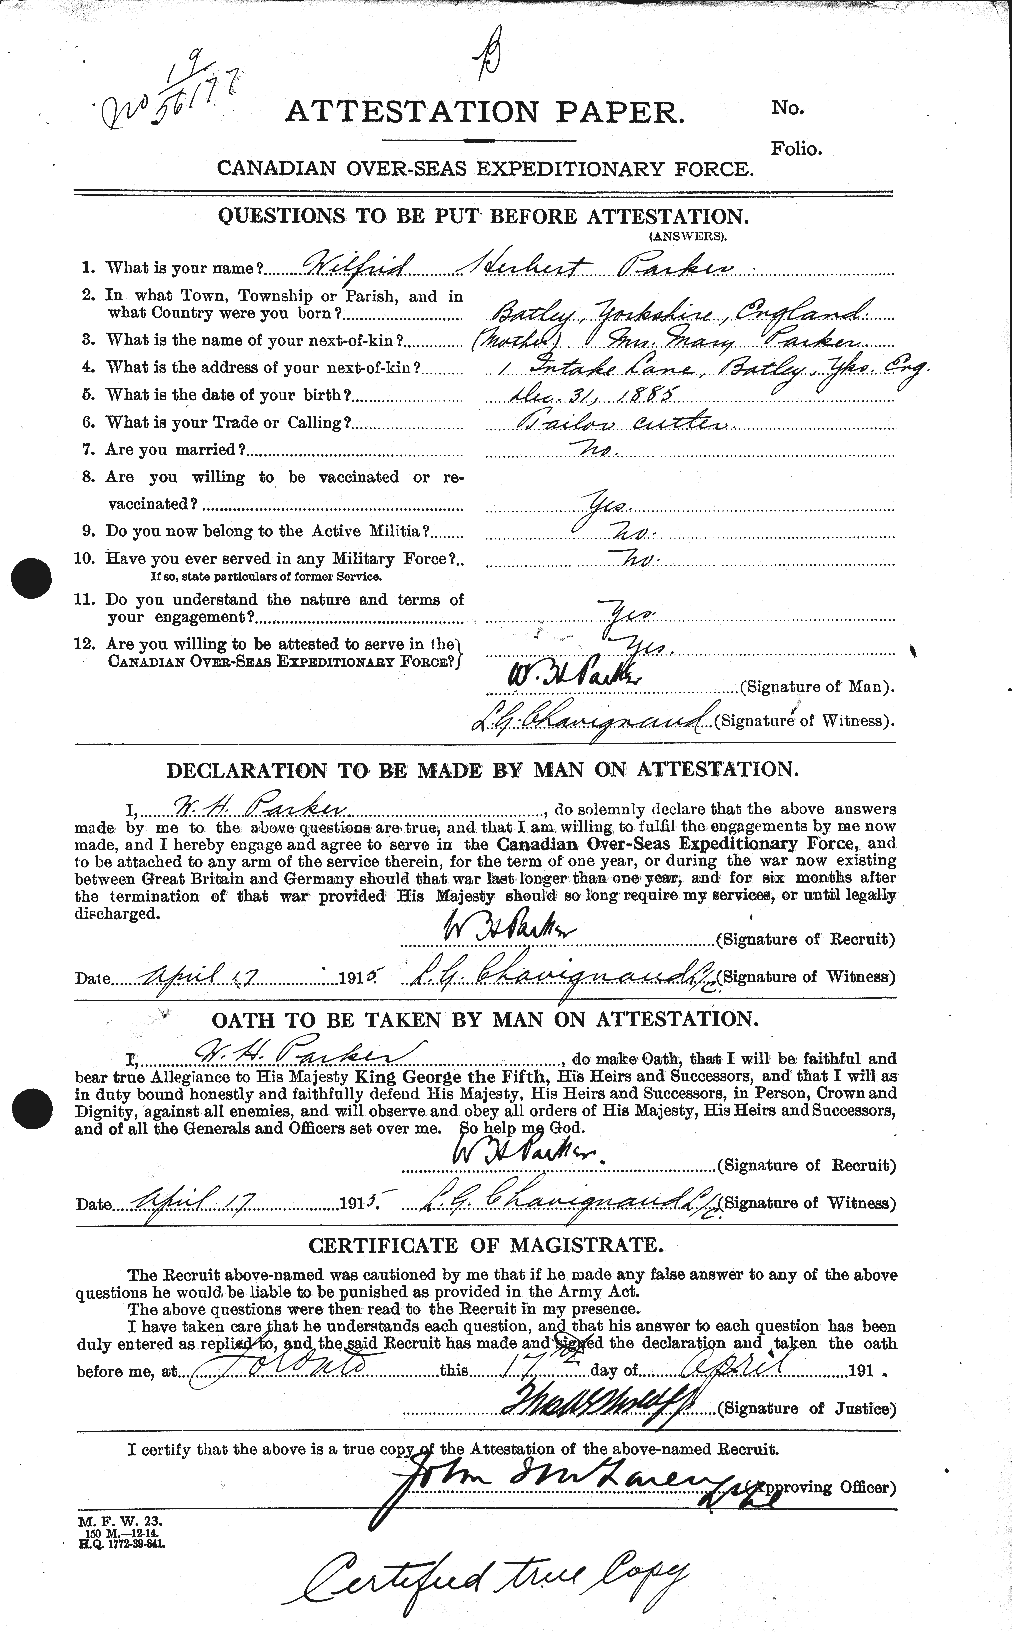 Personnel Records of the First World War - CEF 565707a